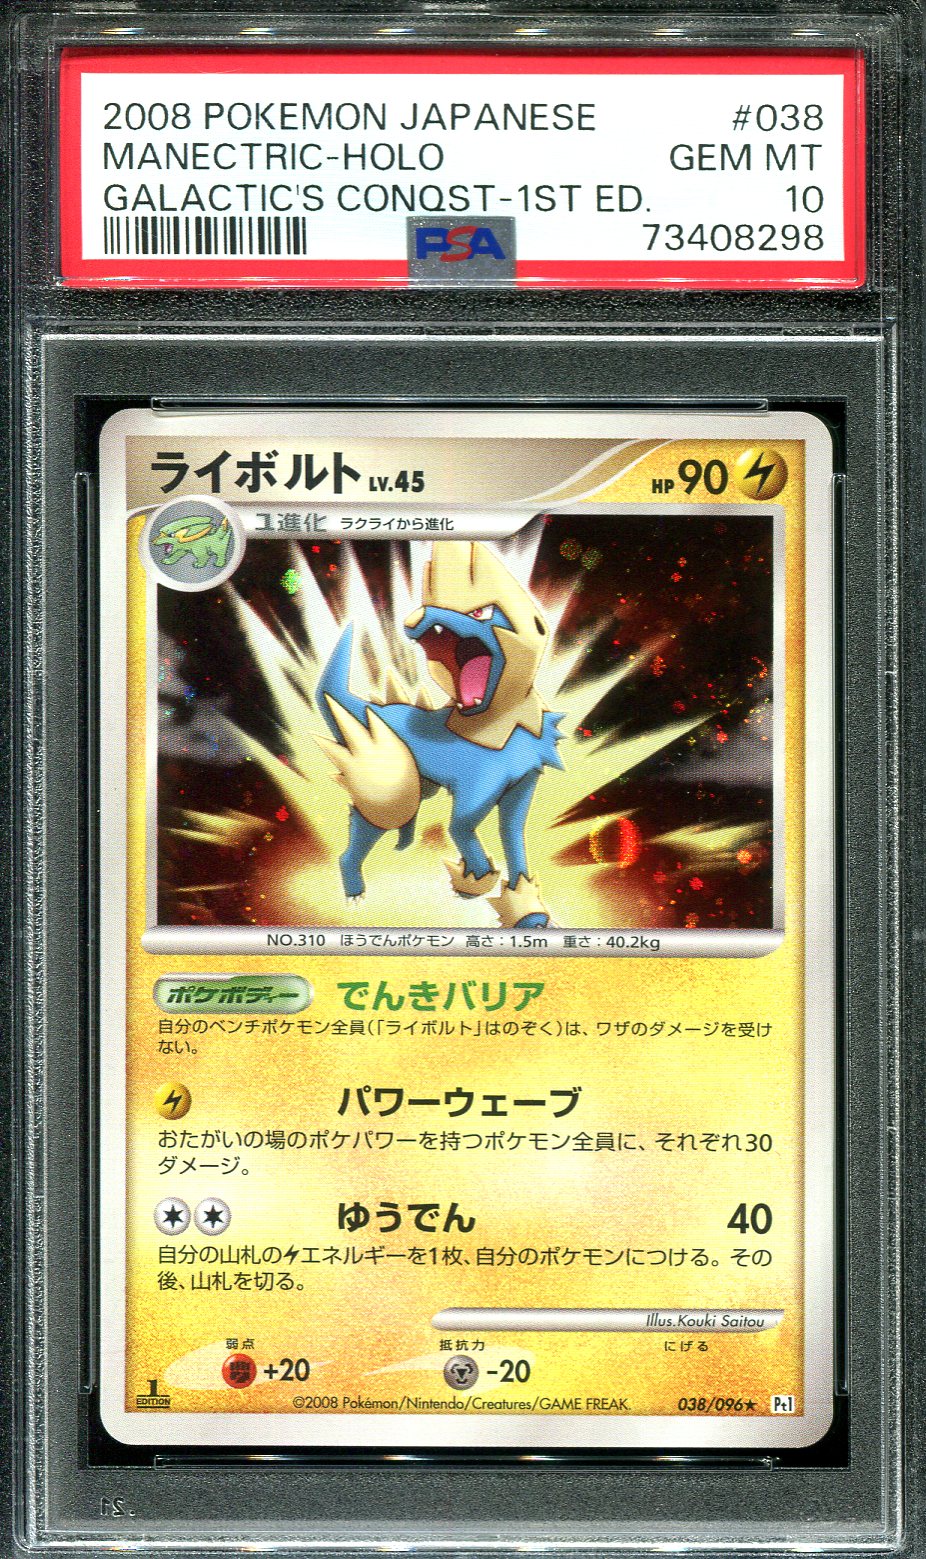 MANECTRIC 038/096 PSA 10 POKEMON GALACTIC'S CONQUEST JAPANESE HOLO